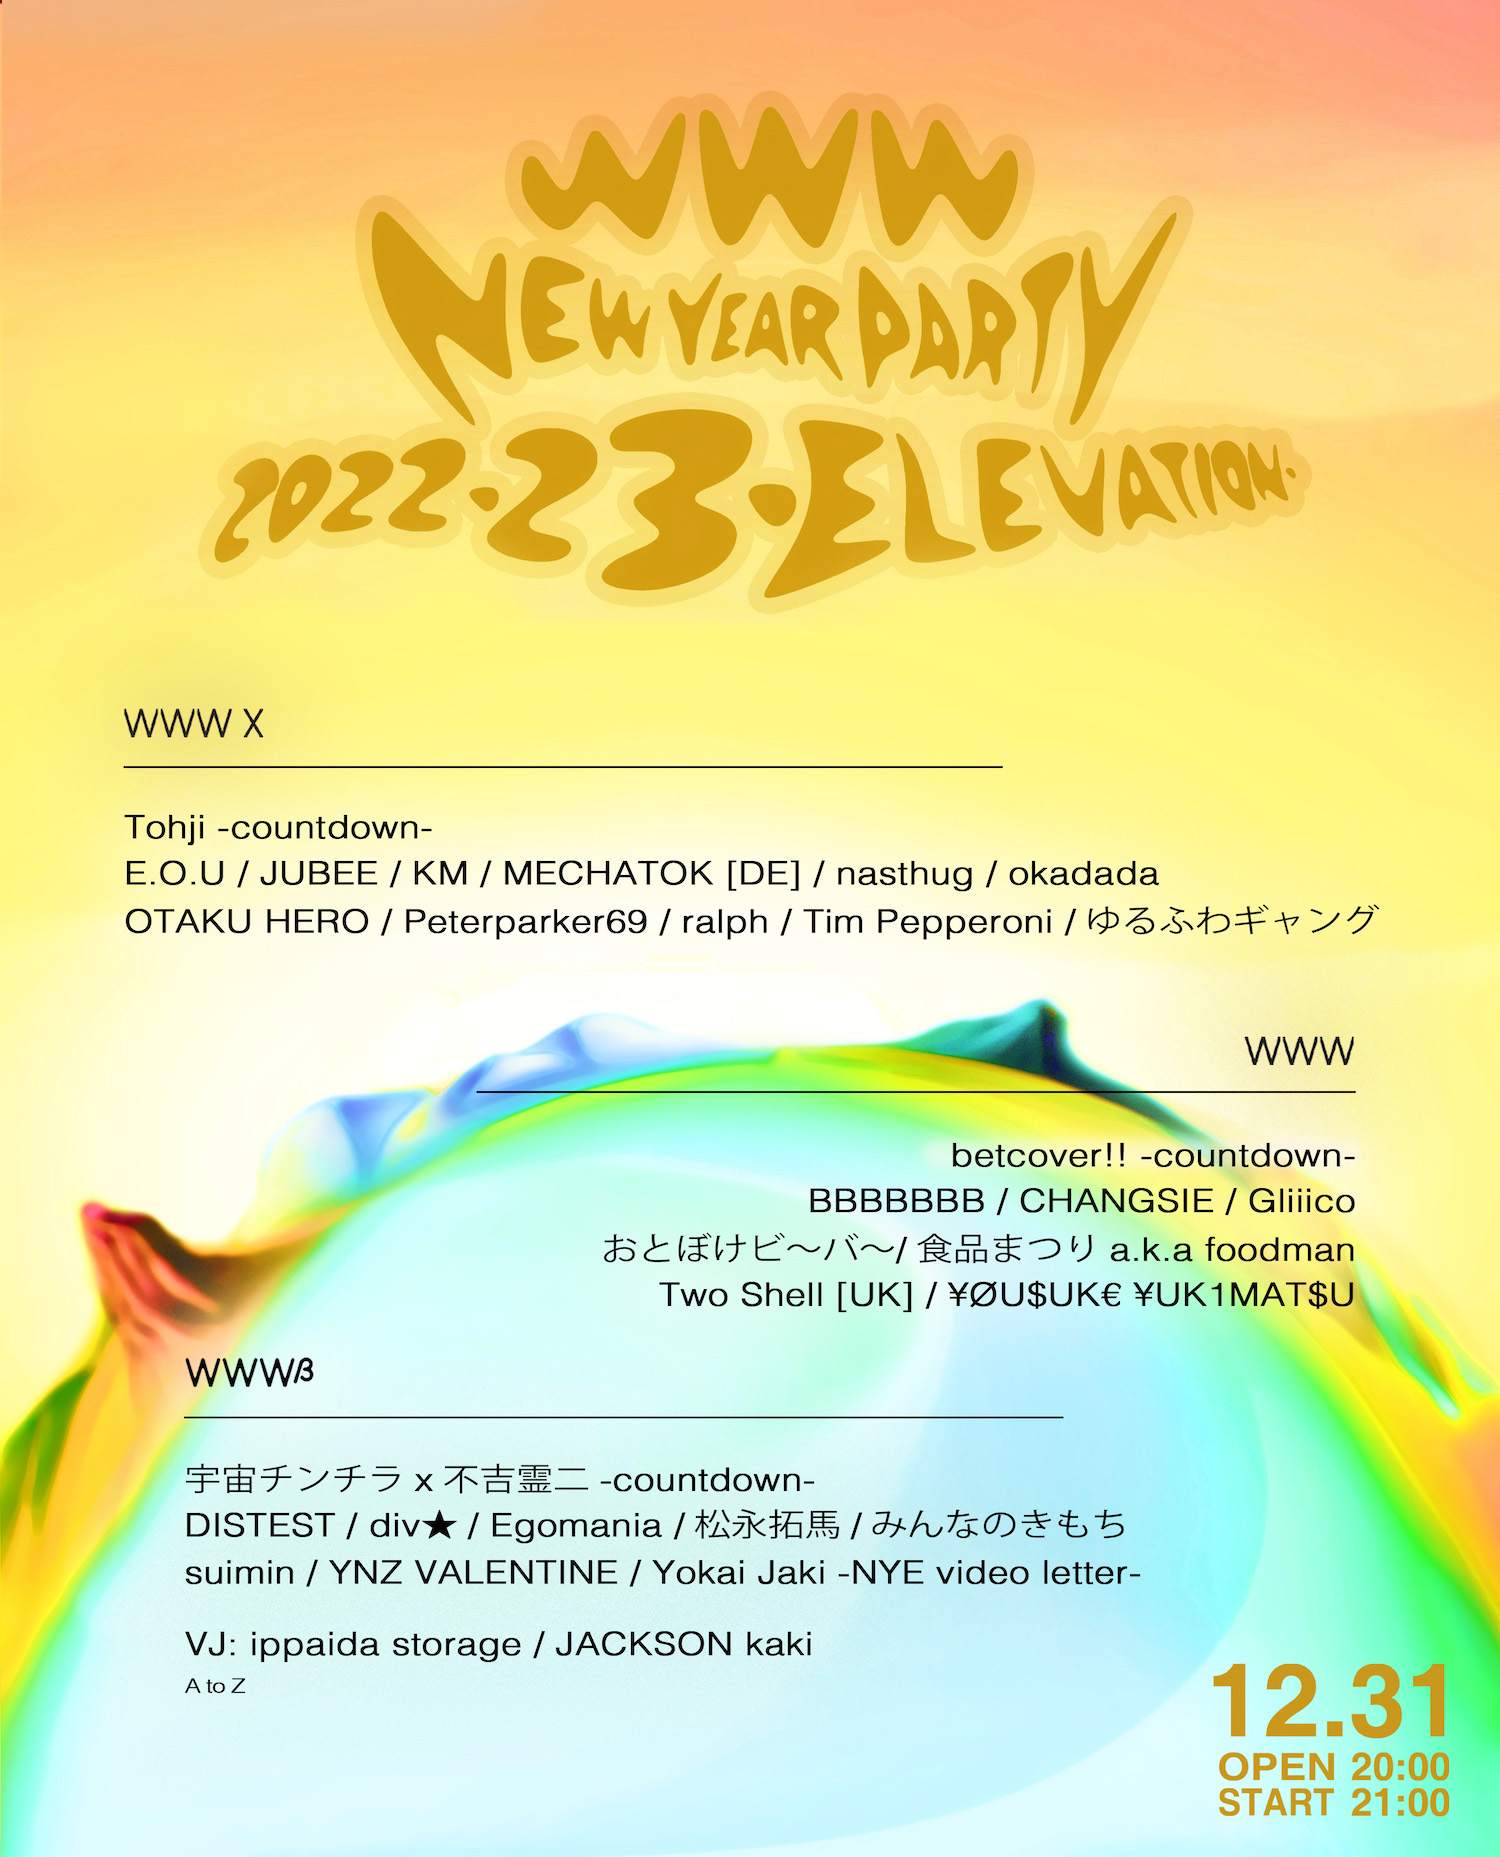 WWW New Year party 2022-23 -elevation- - フライヤー表